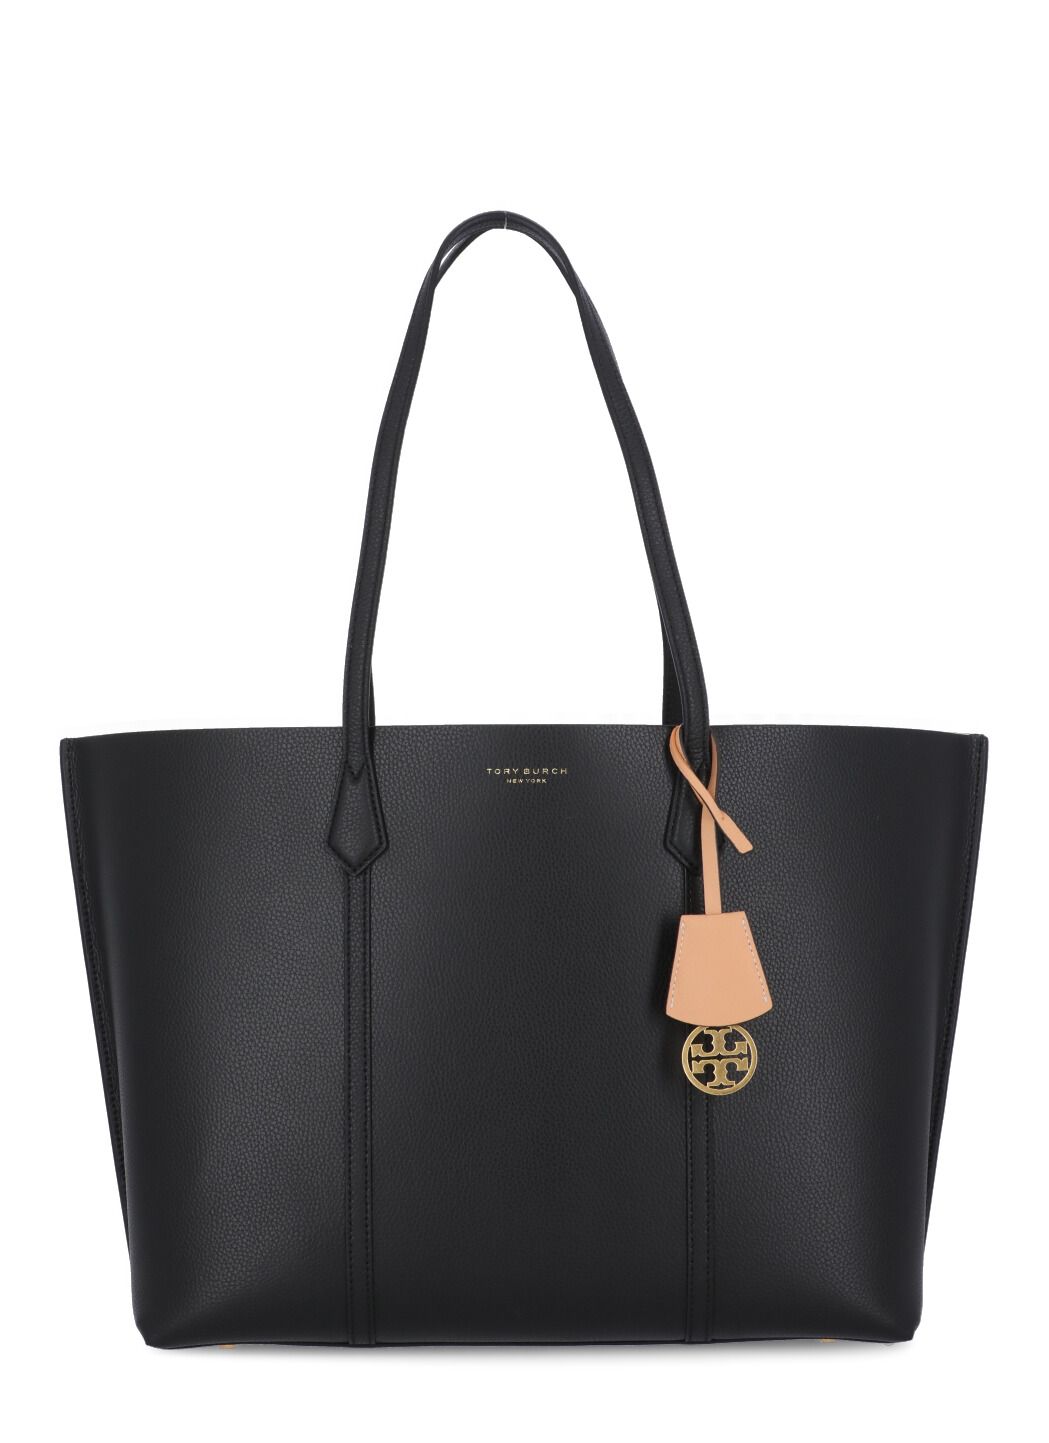 tory burch perry tote black